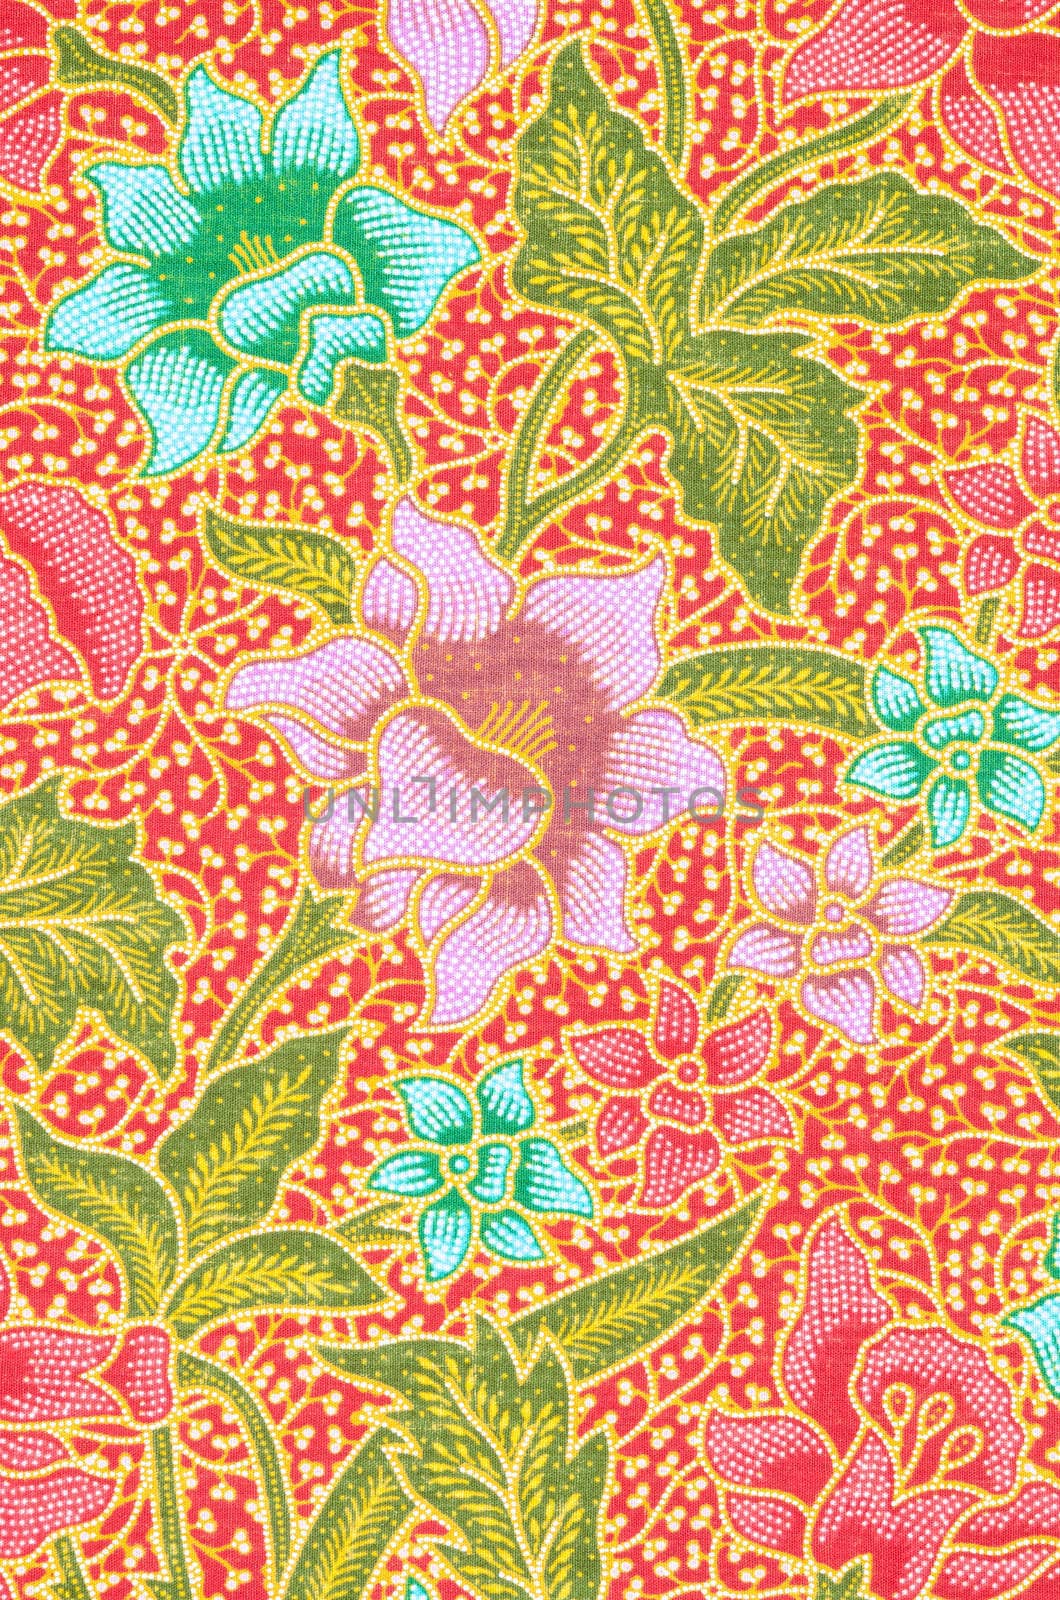 Background of Thai style fabric. by Gamjai